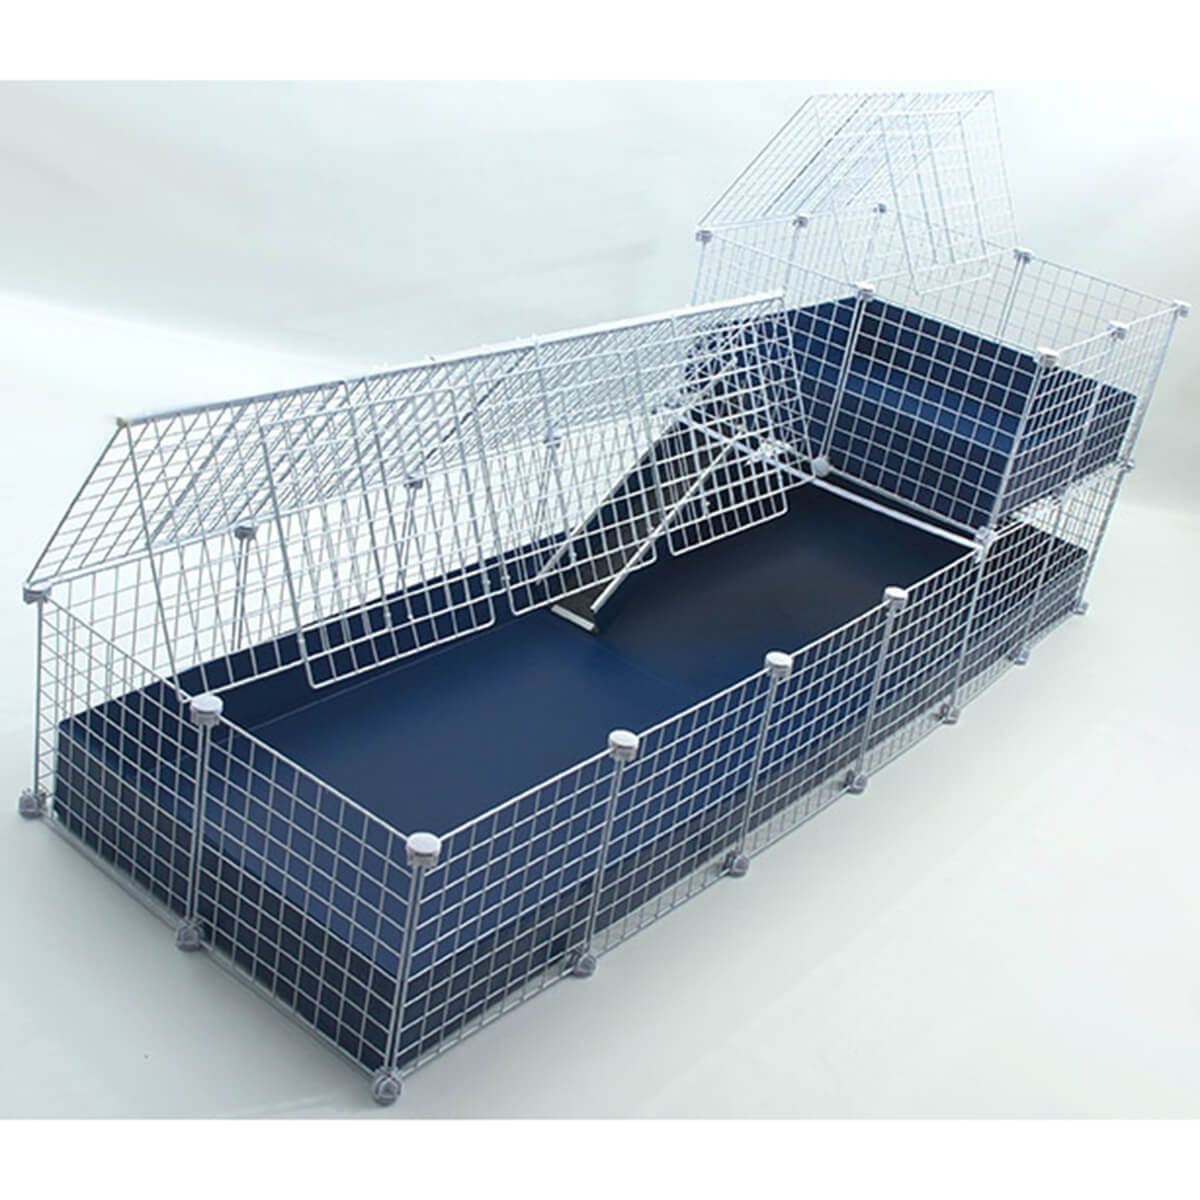 LARGE 56" x 28" Guinea Pig cage with 2nd level * NEW 